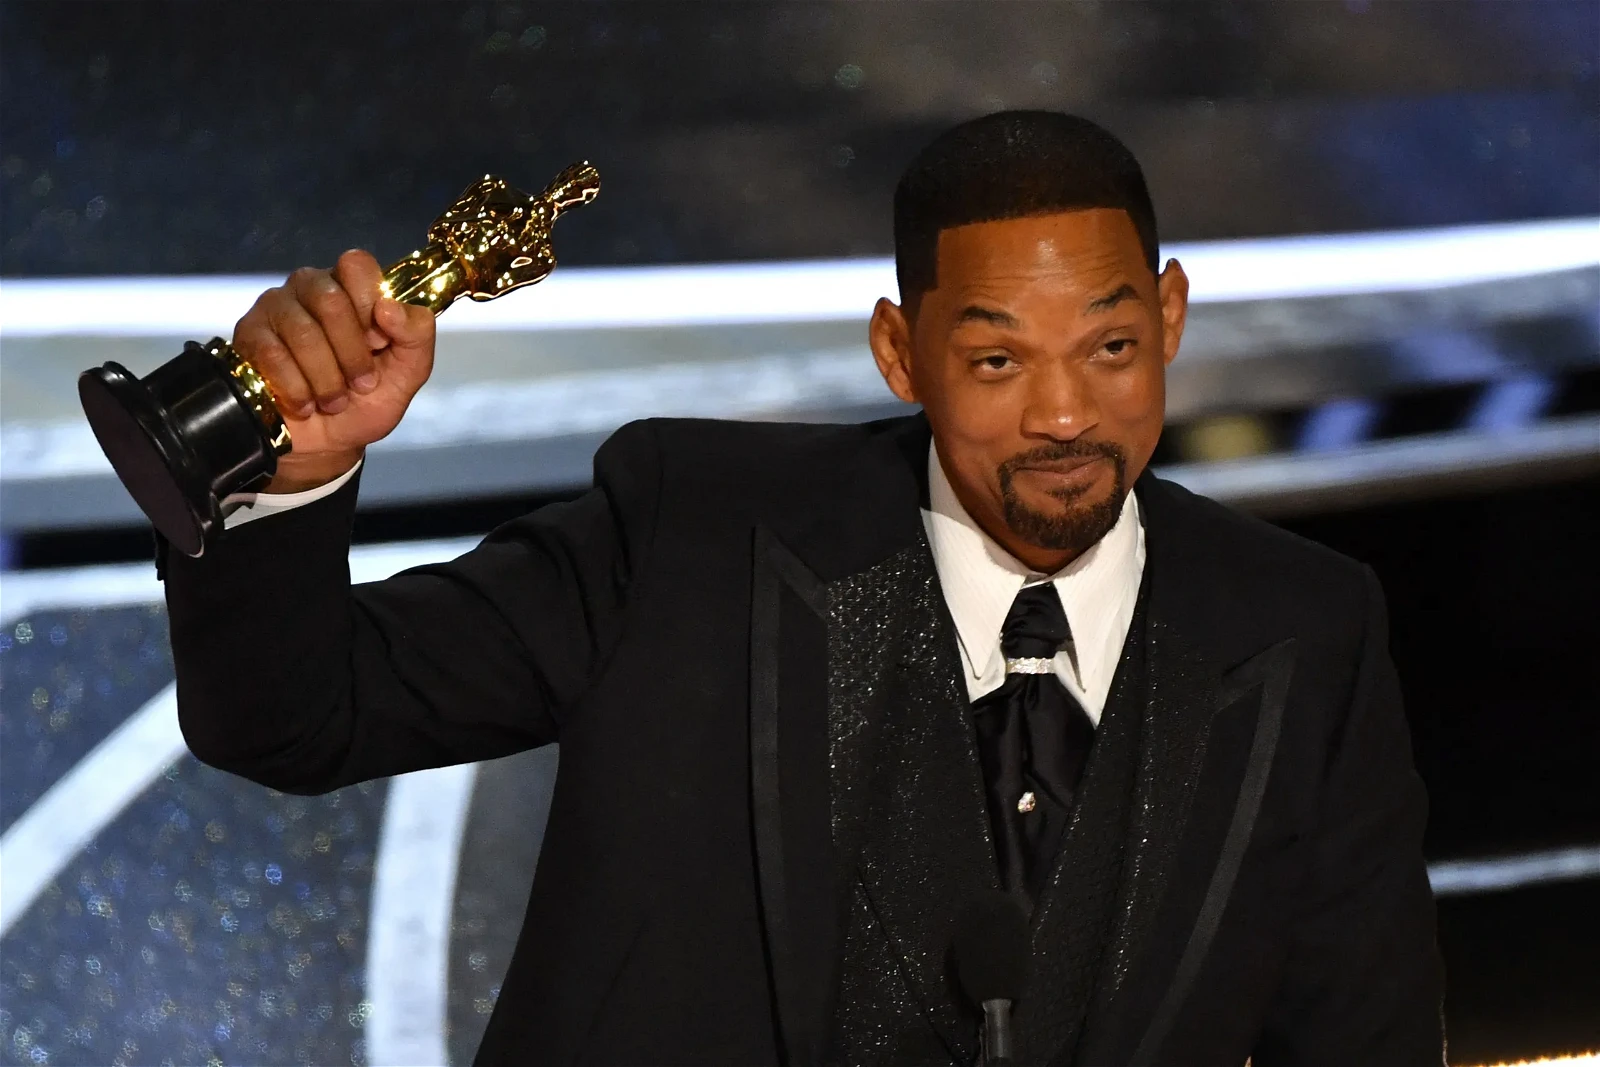 Will Smith accepting an Oscar shortly after slapping Chris Rock.